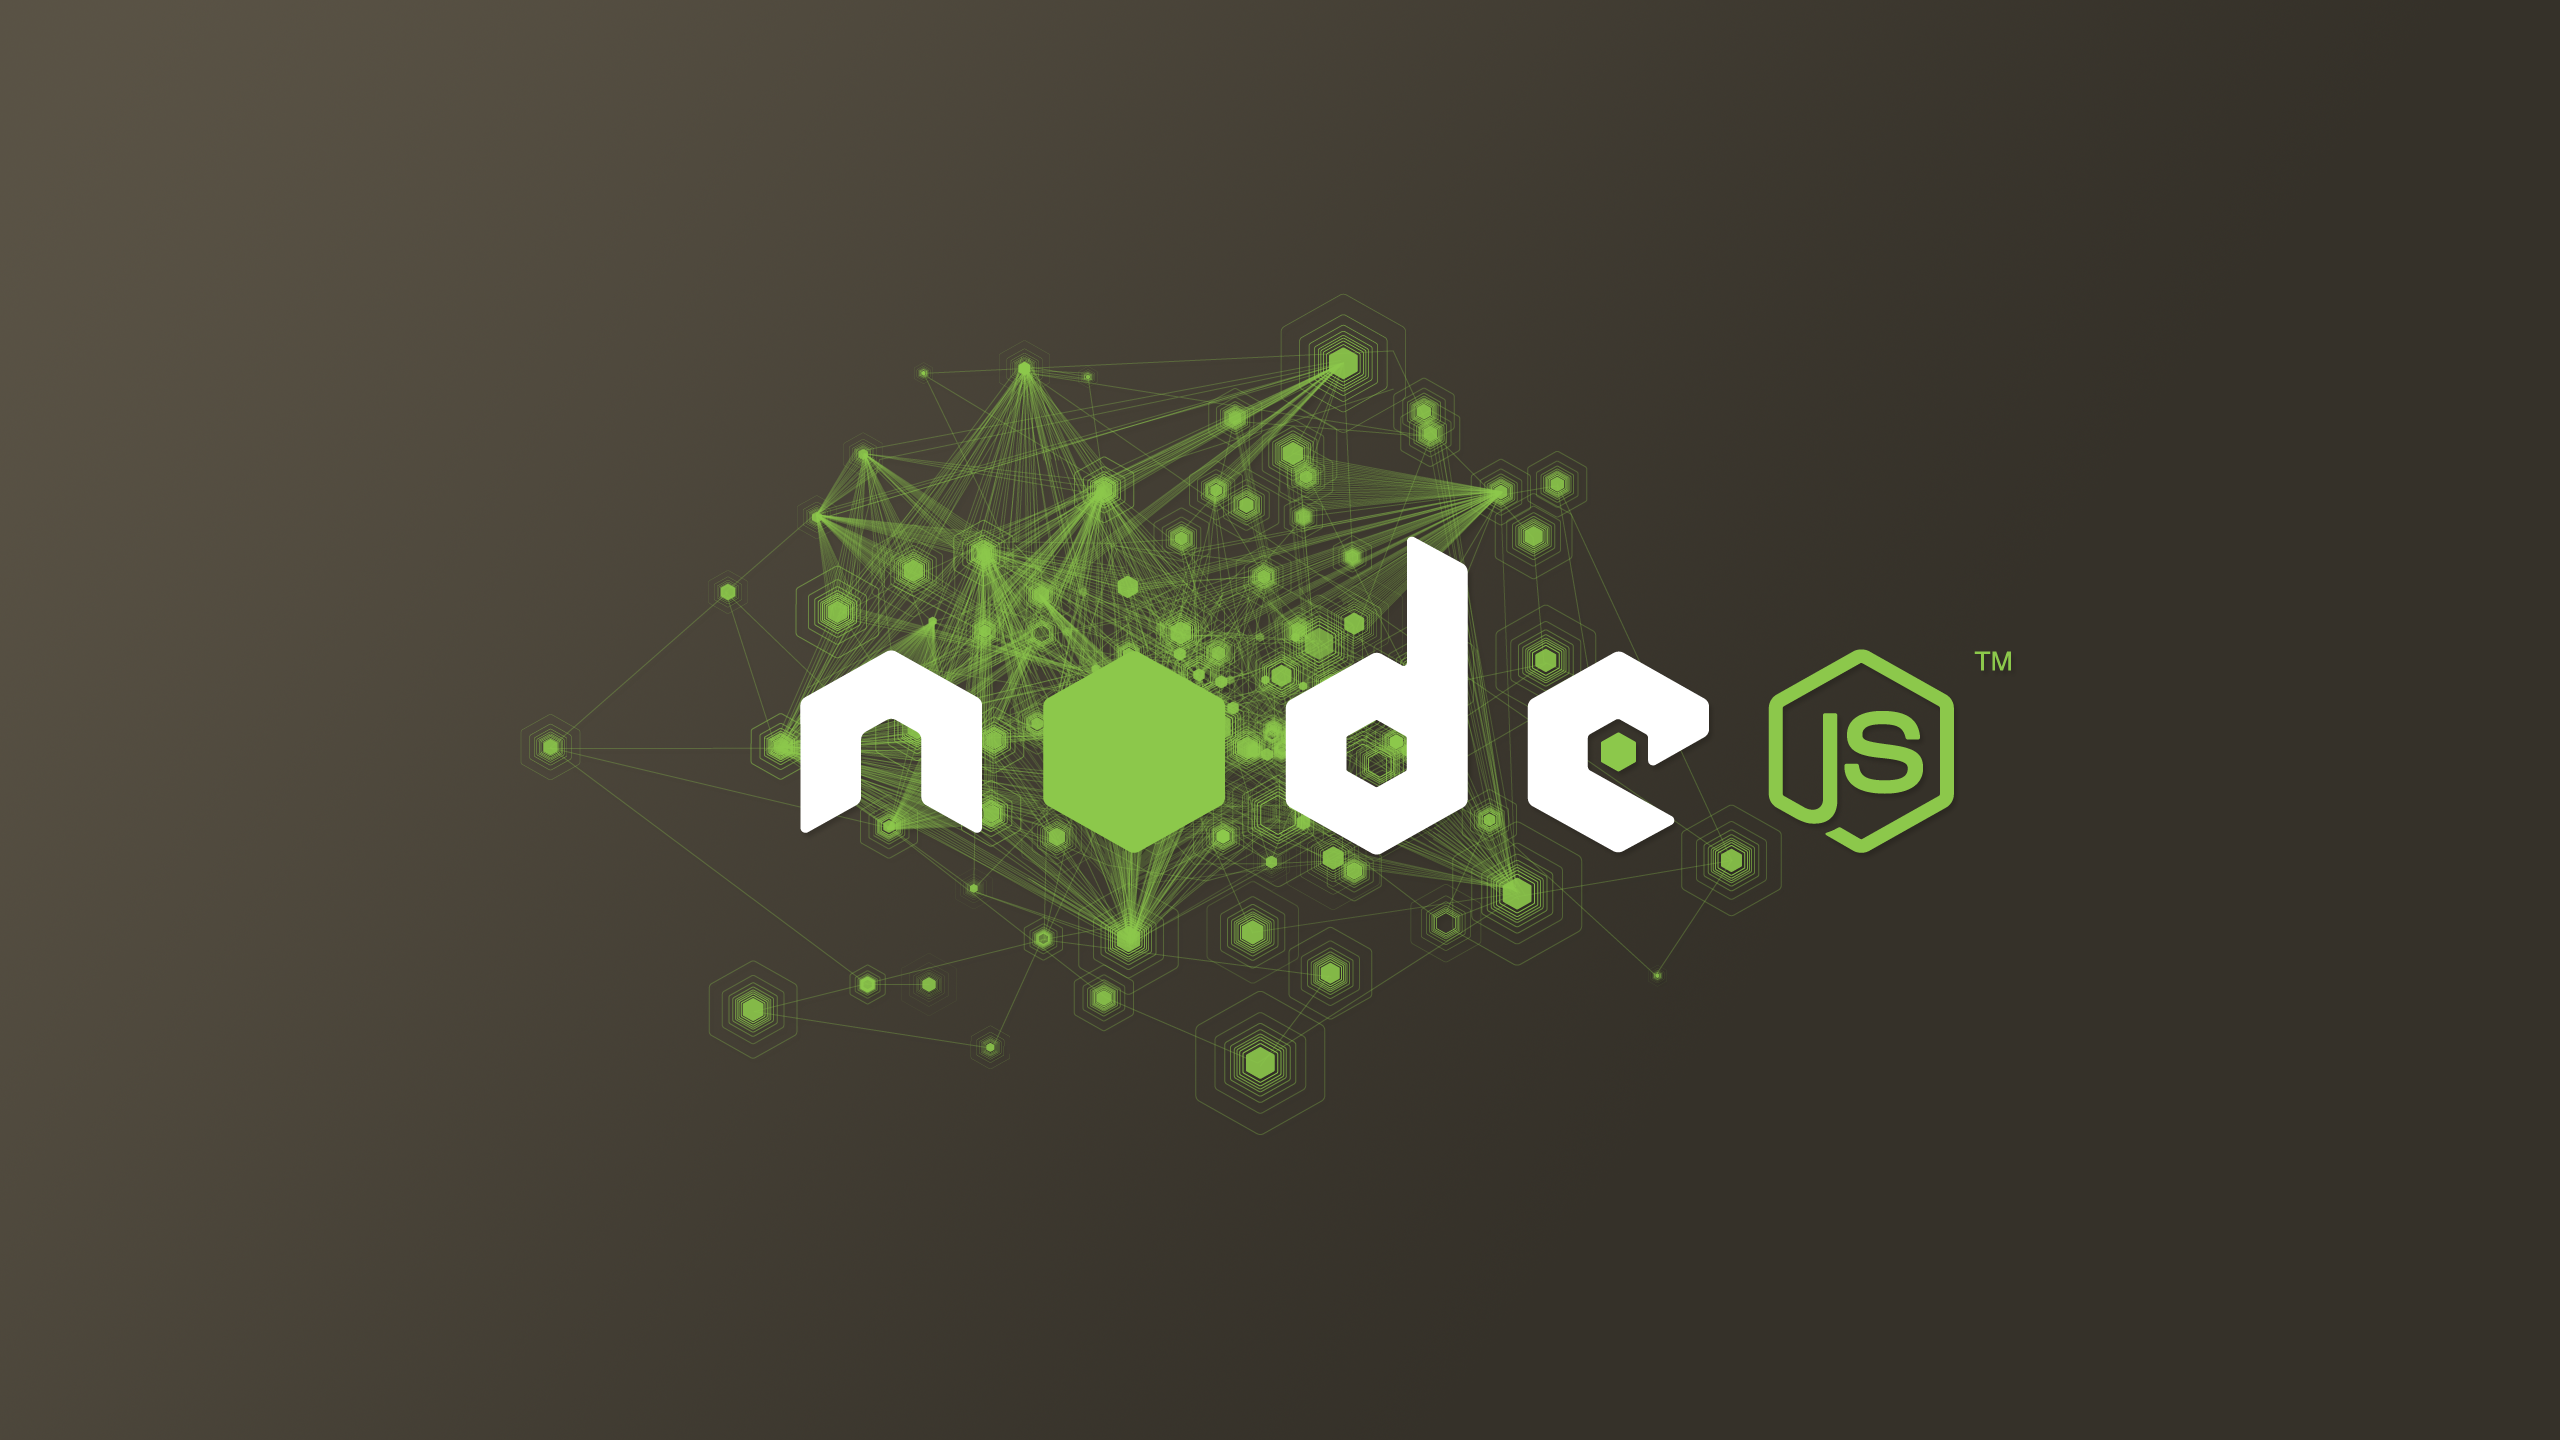 1 Node.js HD Wallpapers | Background Images - Wallpaper Abyss